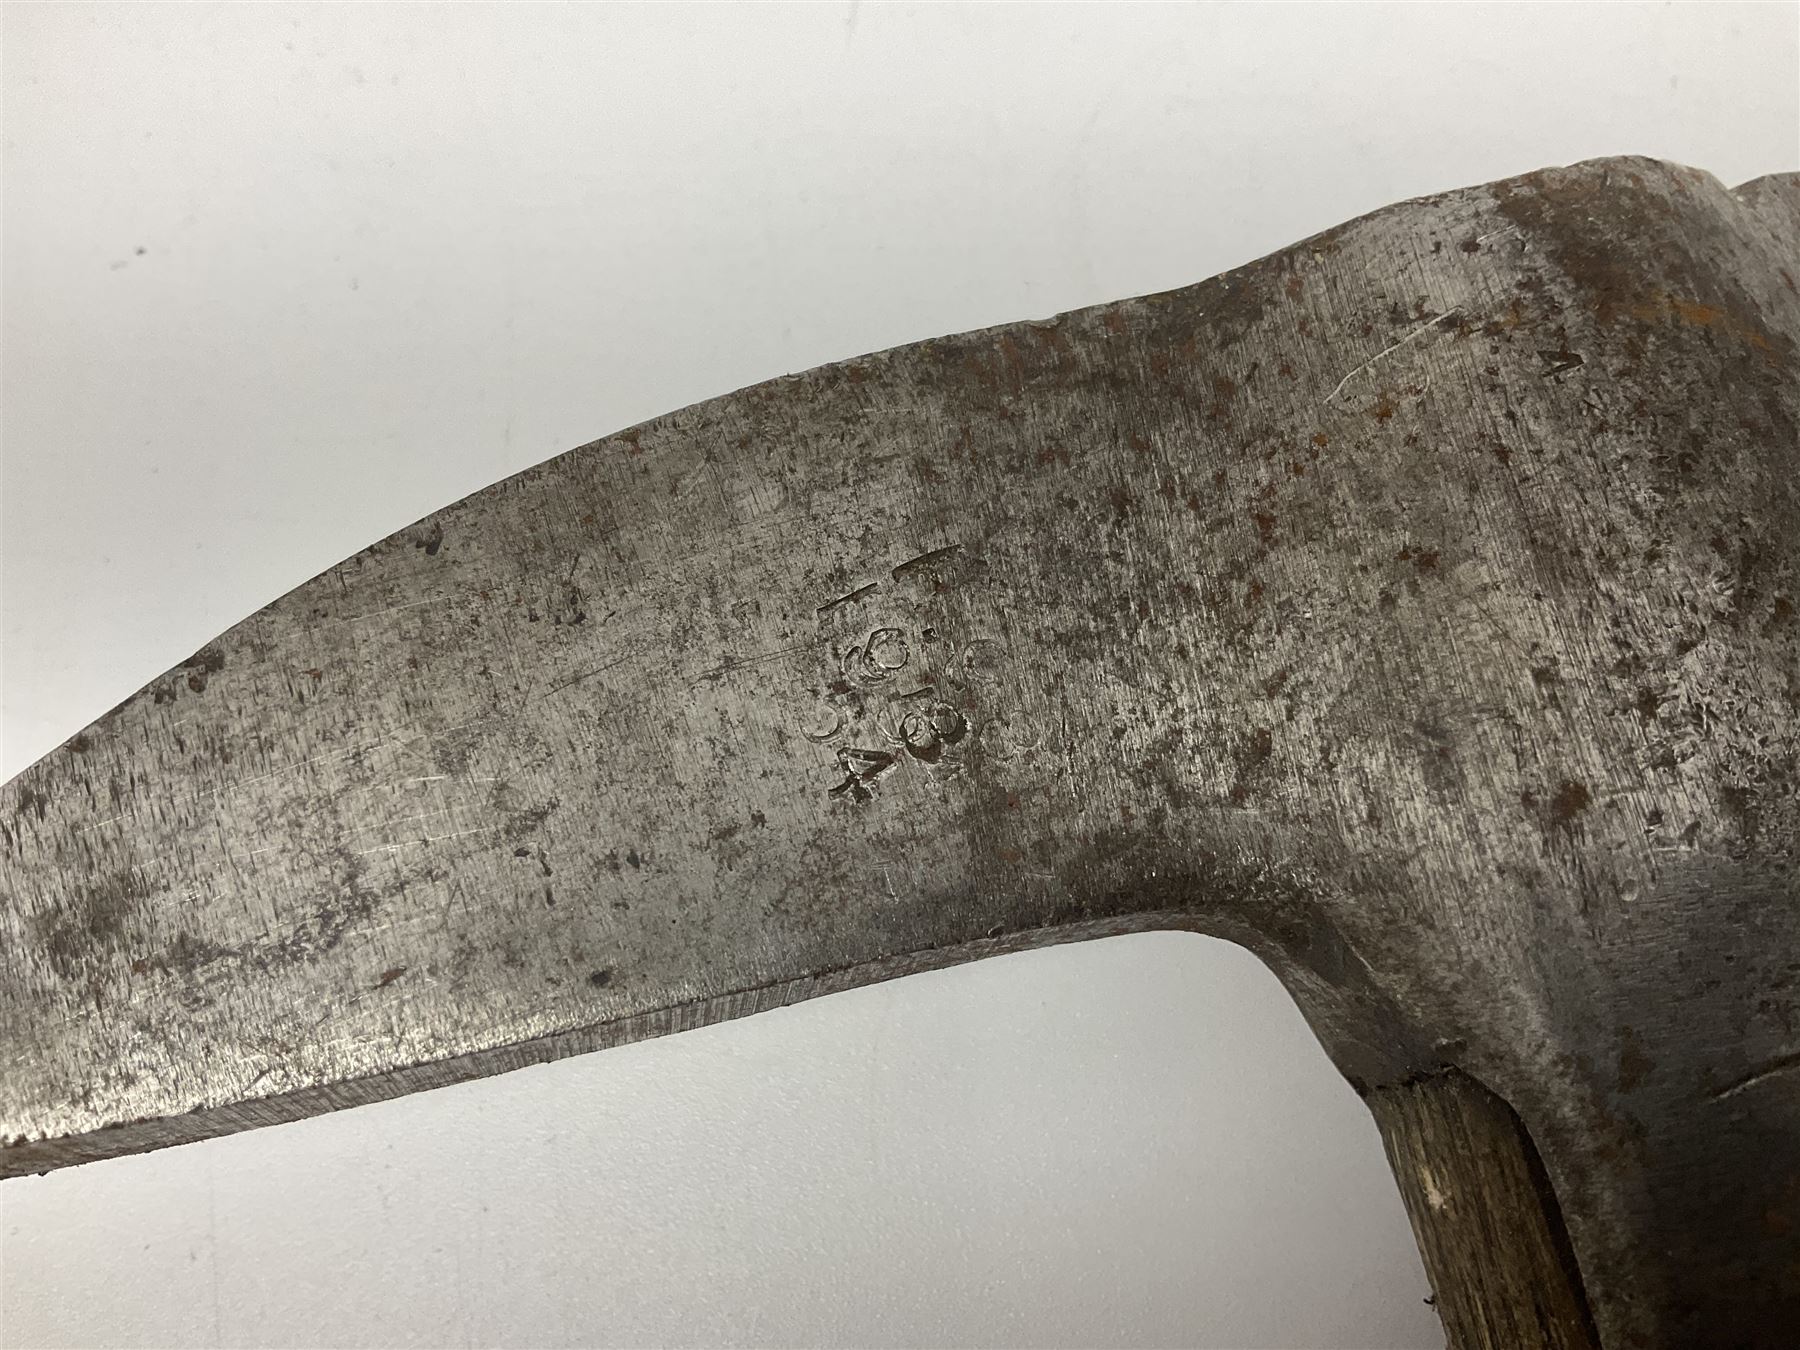 Post-War military type fireman's axe impressed 'PERKS 1953/54' with additional indistinct mark proba - Image 11 of 19